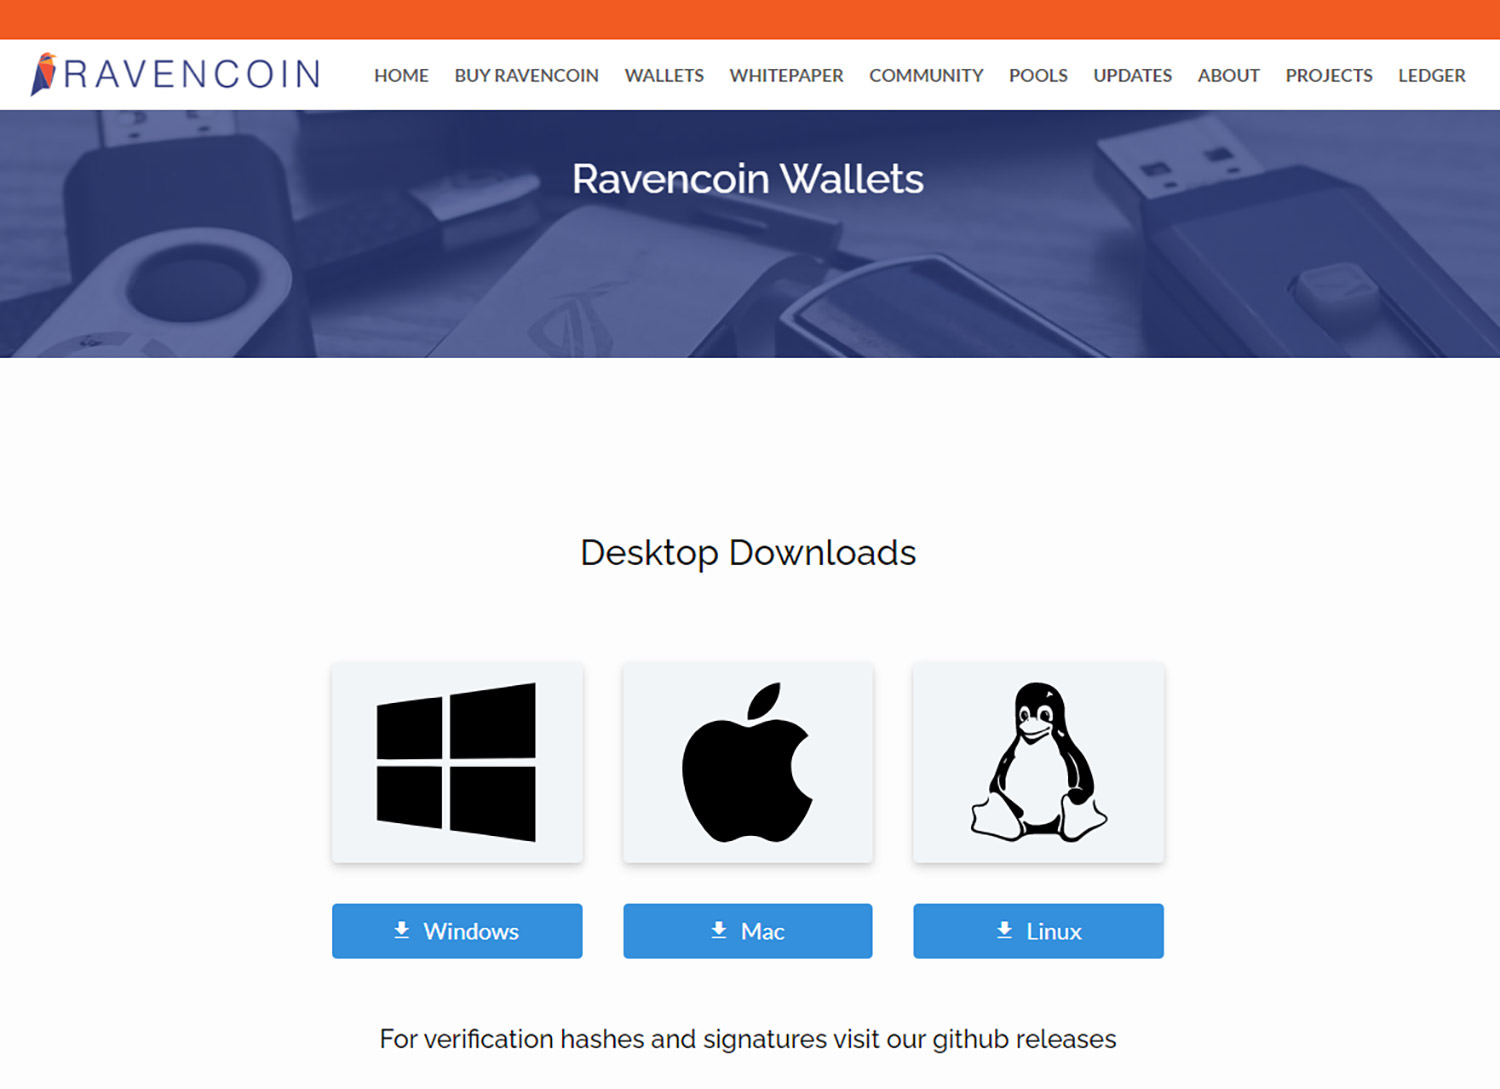 The Quick Guide to Mining Ravencoin